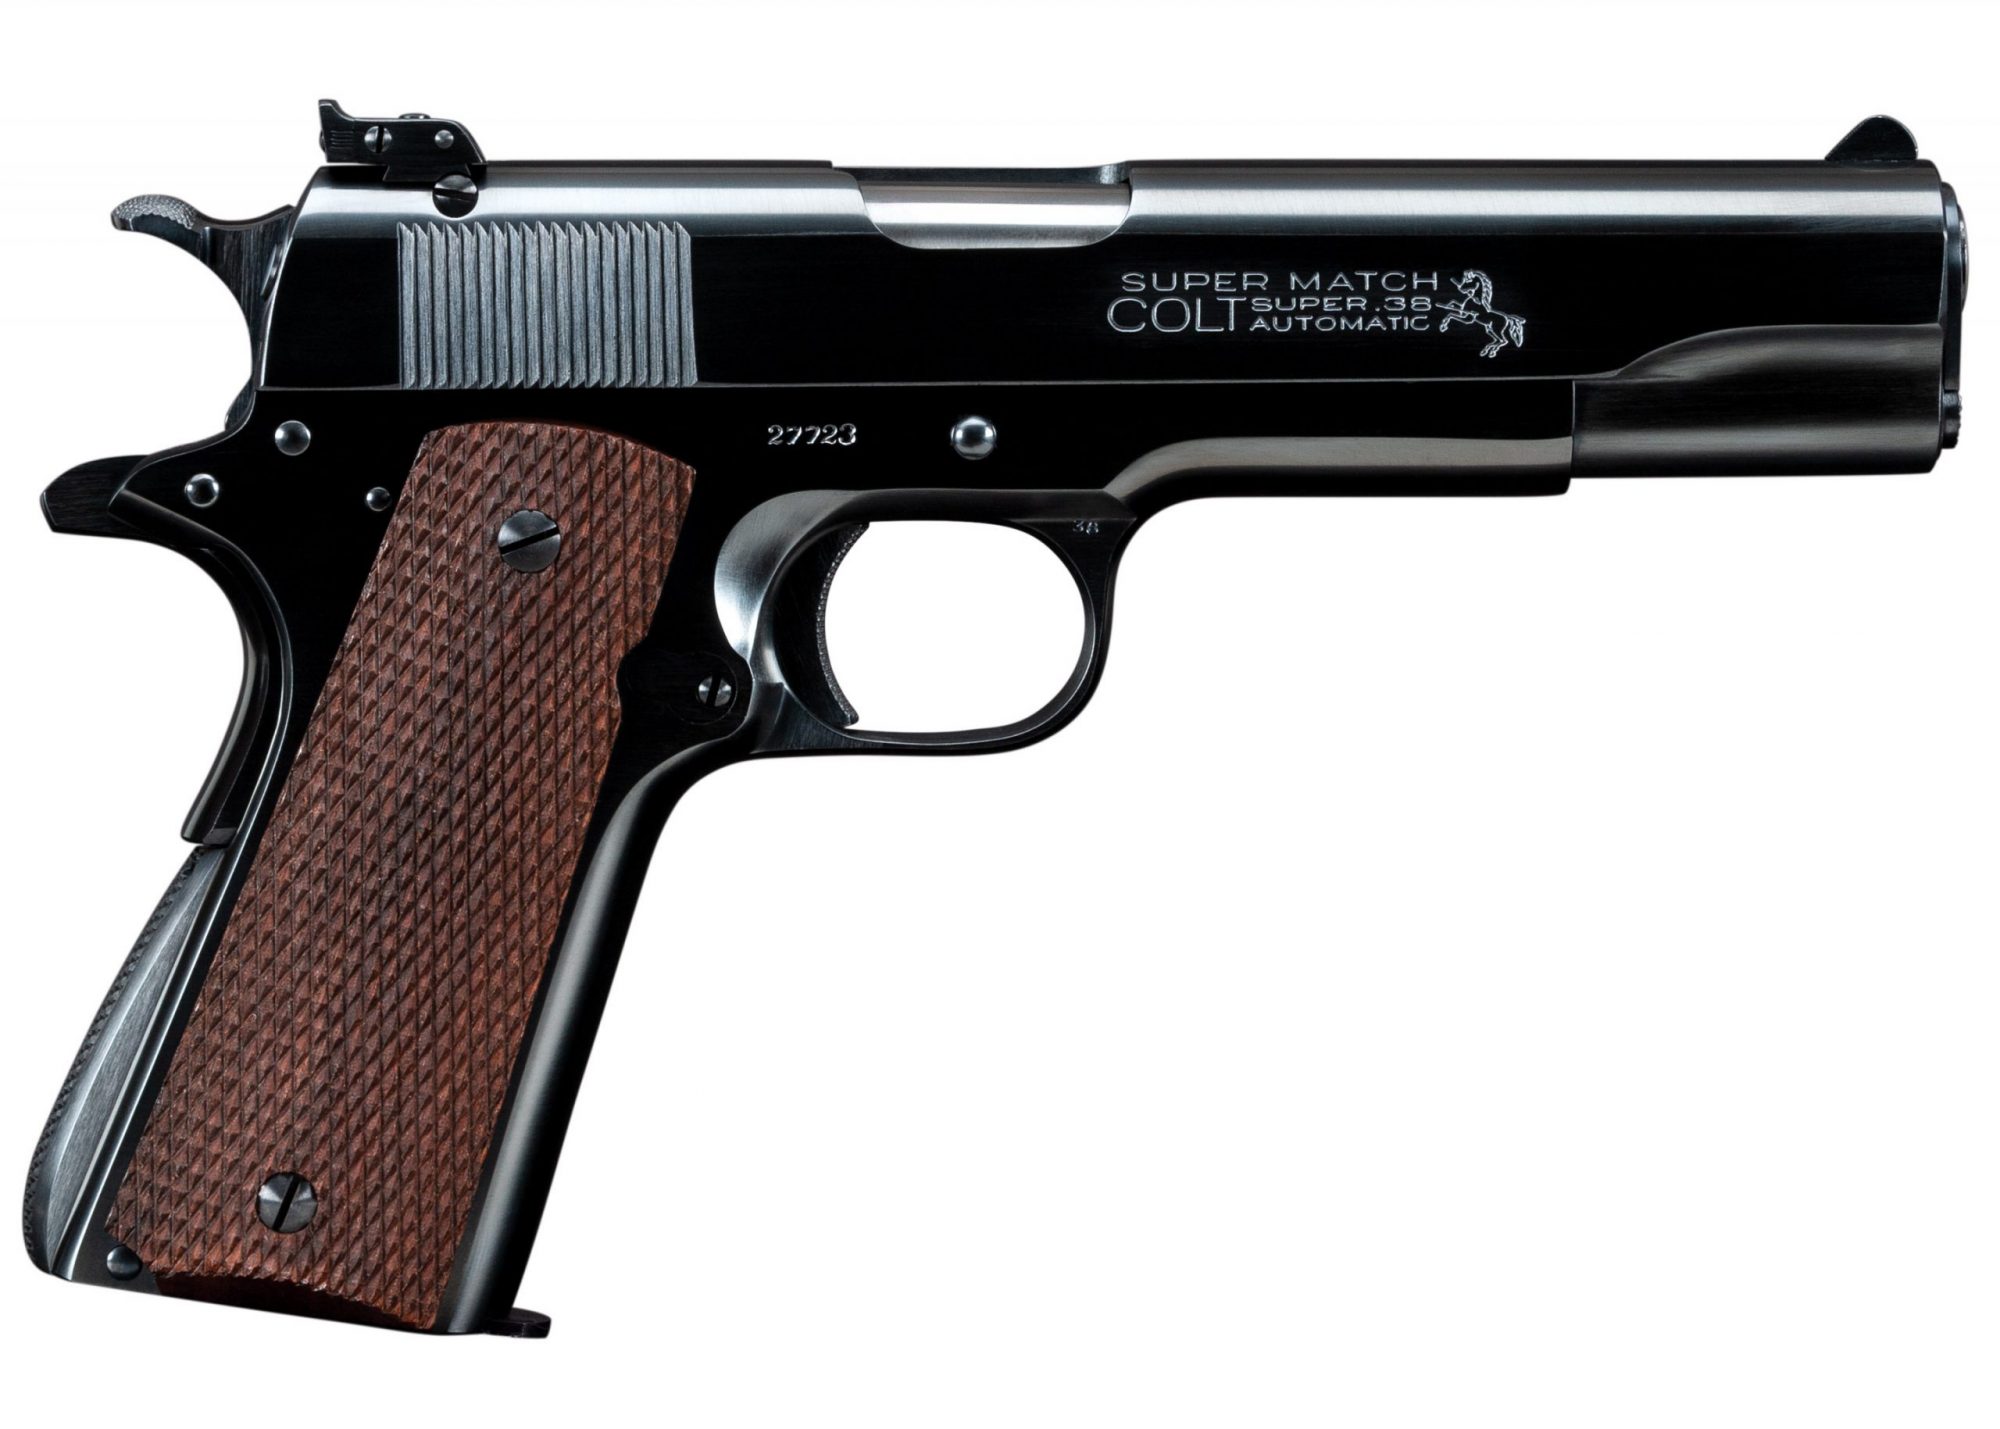 Photo of a Colt Super Match .38 Super Automatic pistol after restoration by Turnbull Restoration of Bloomfield, NY